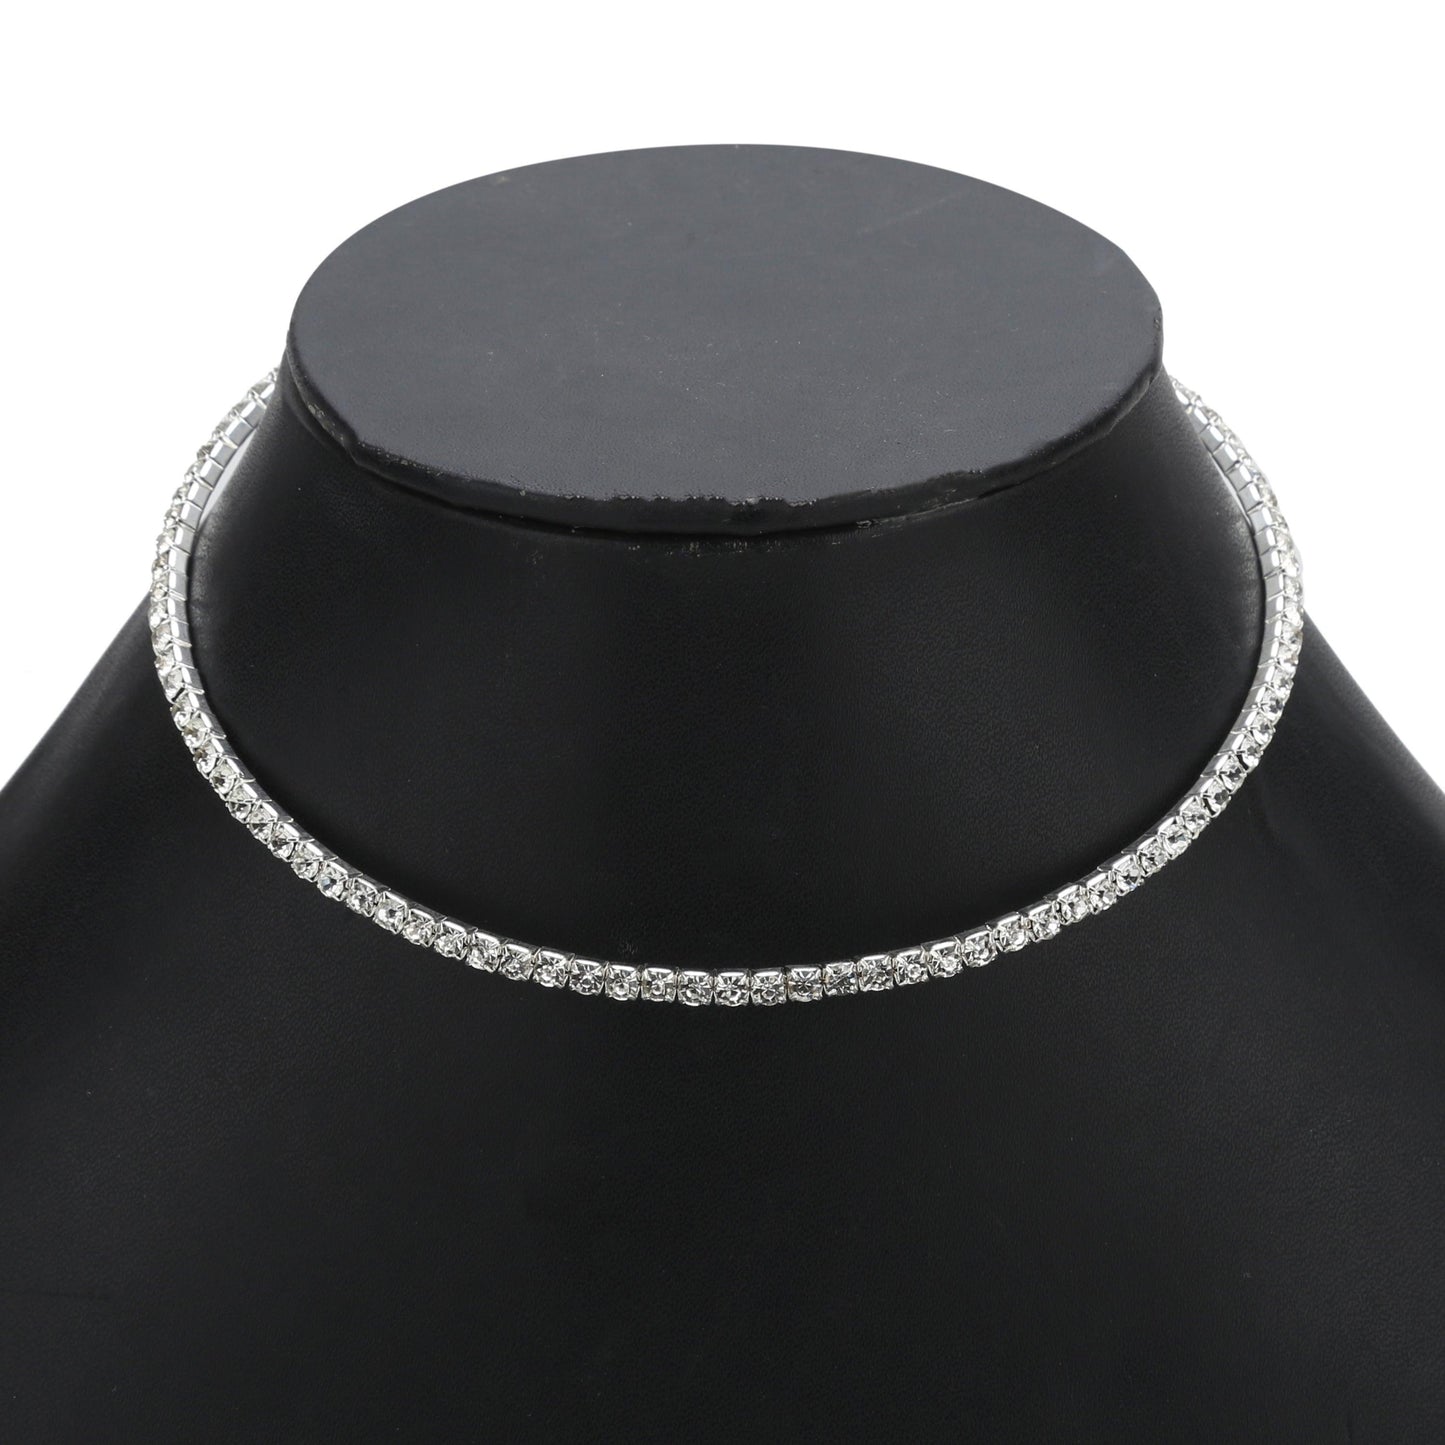 sukriti stylish adorable american diamond necklace with chain for girls & women